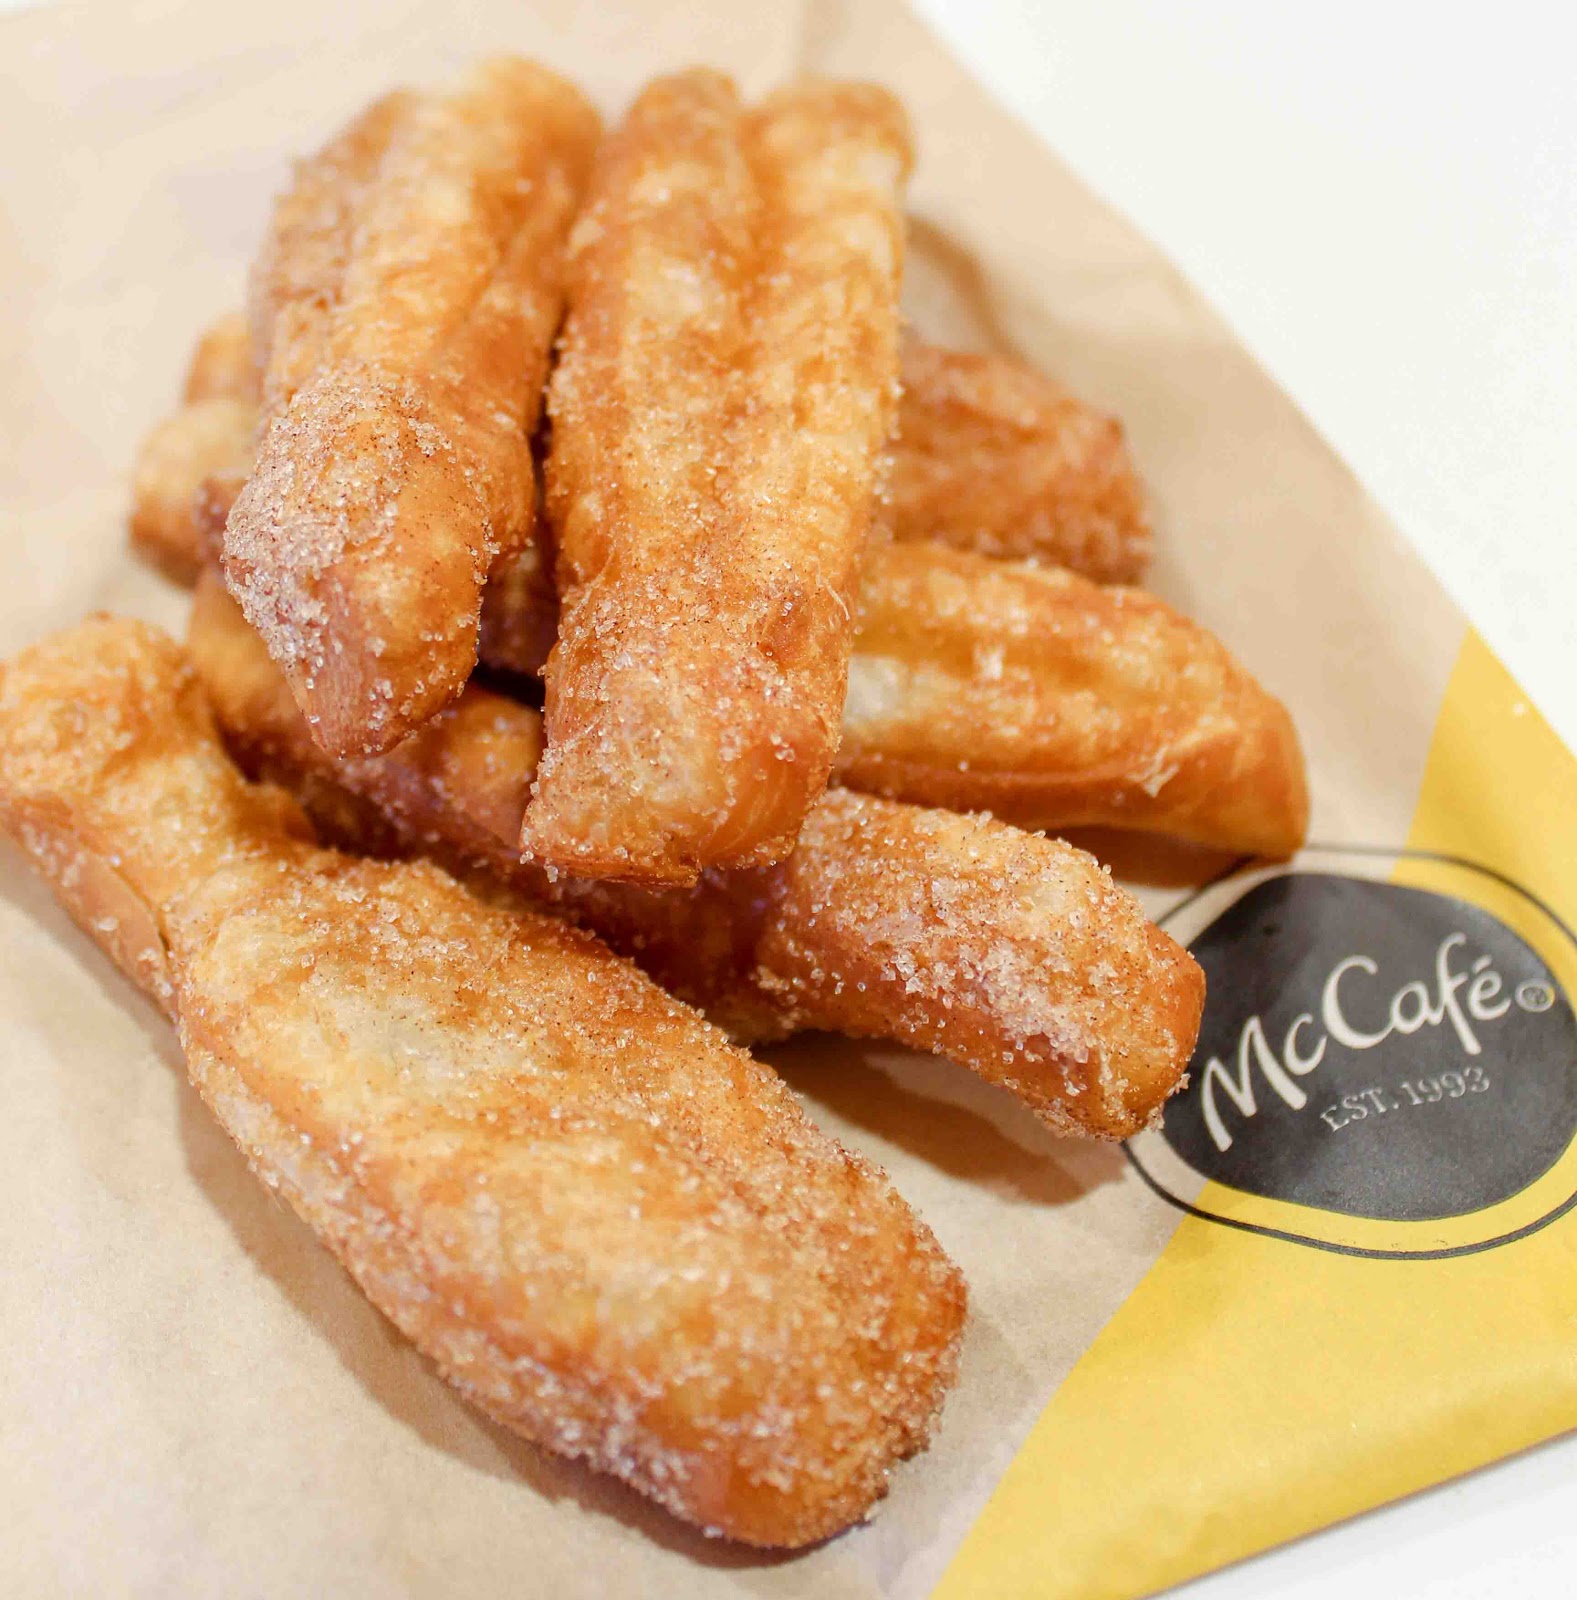 Donut Sticks are here! Head to your local McDonalds to try them! They're light, crispy and dusted with cinnamon sugar! yum!